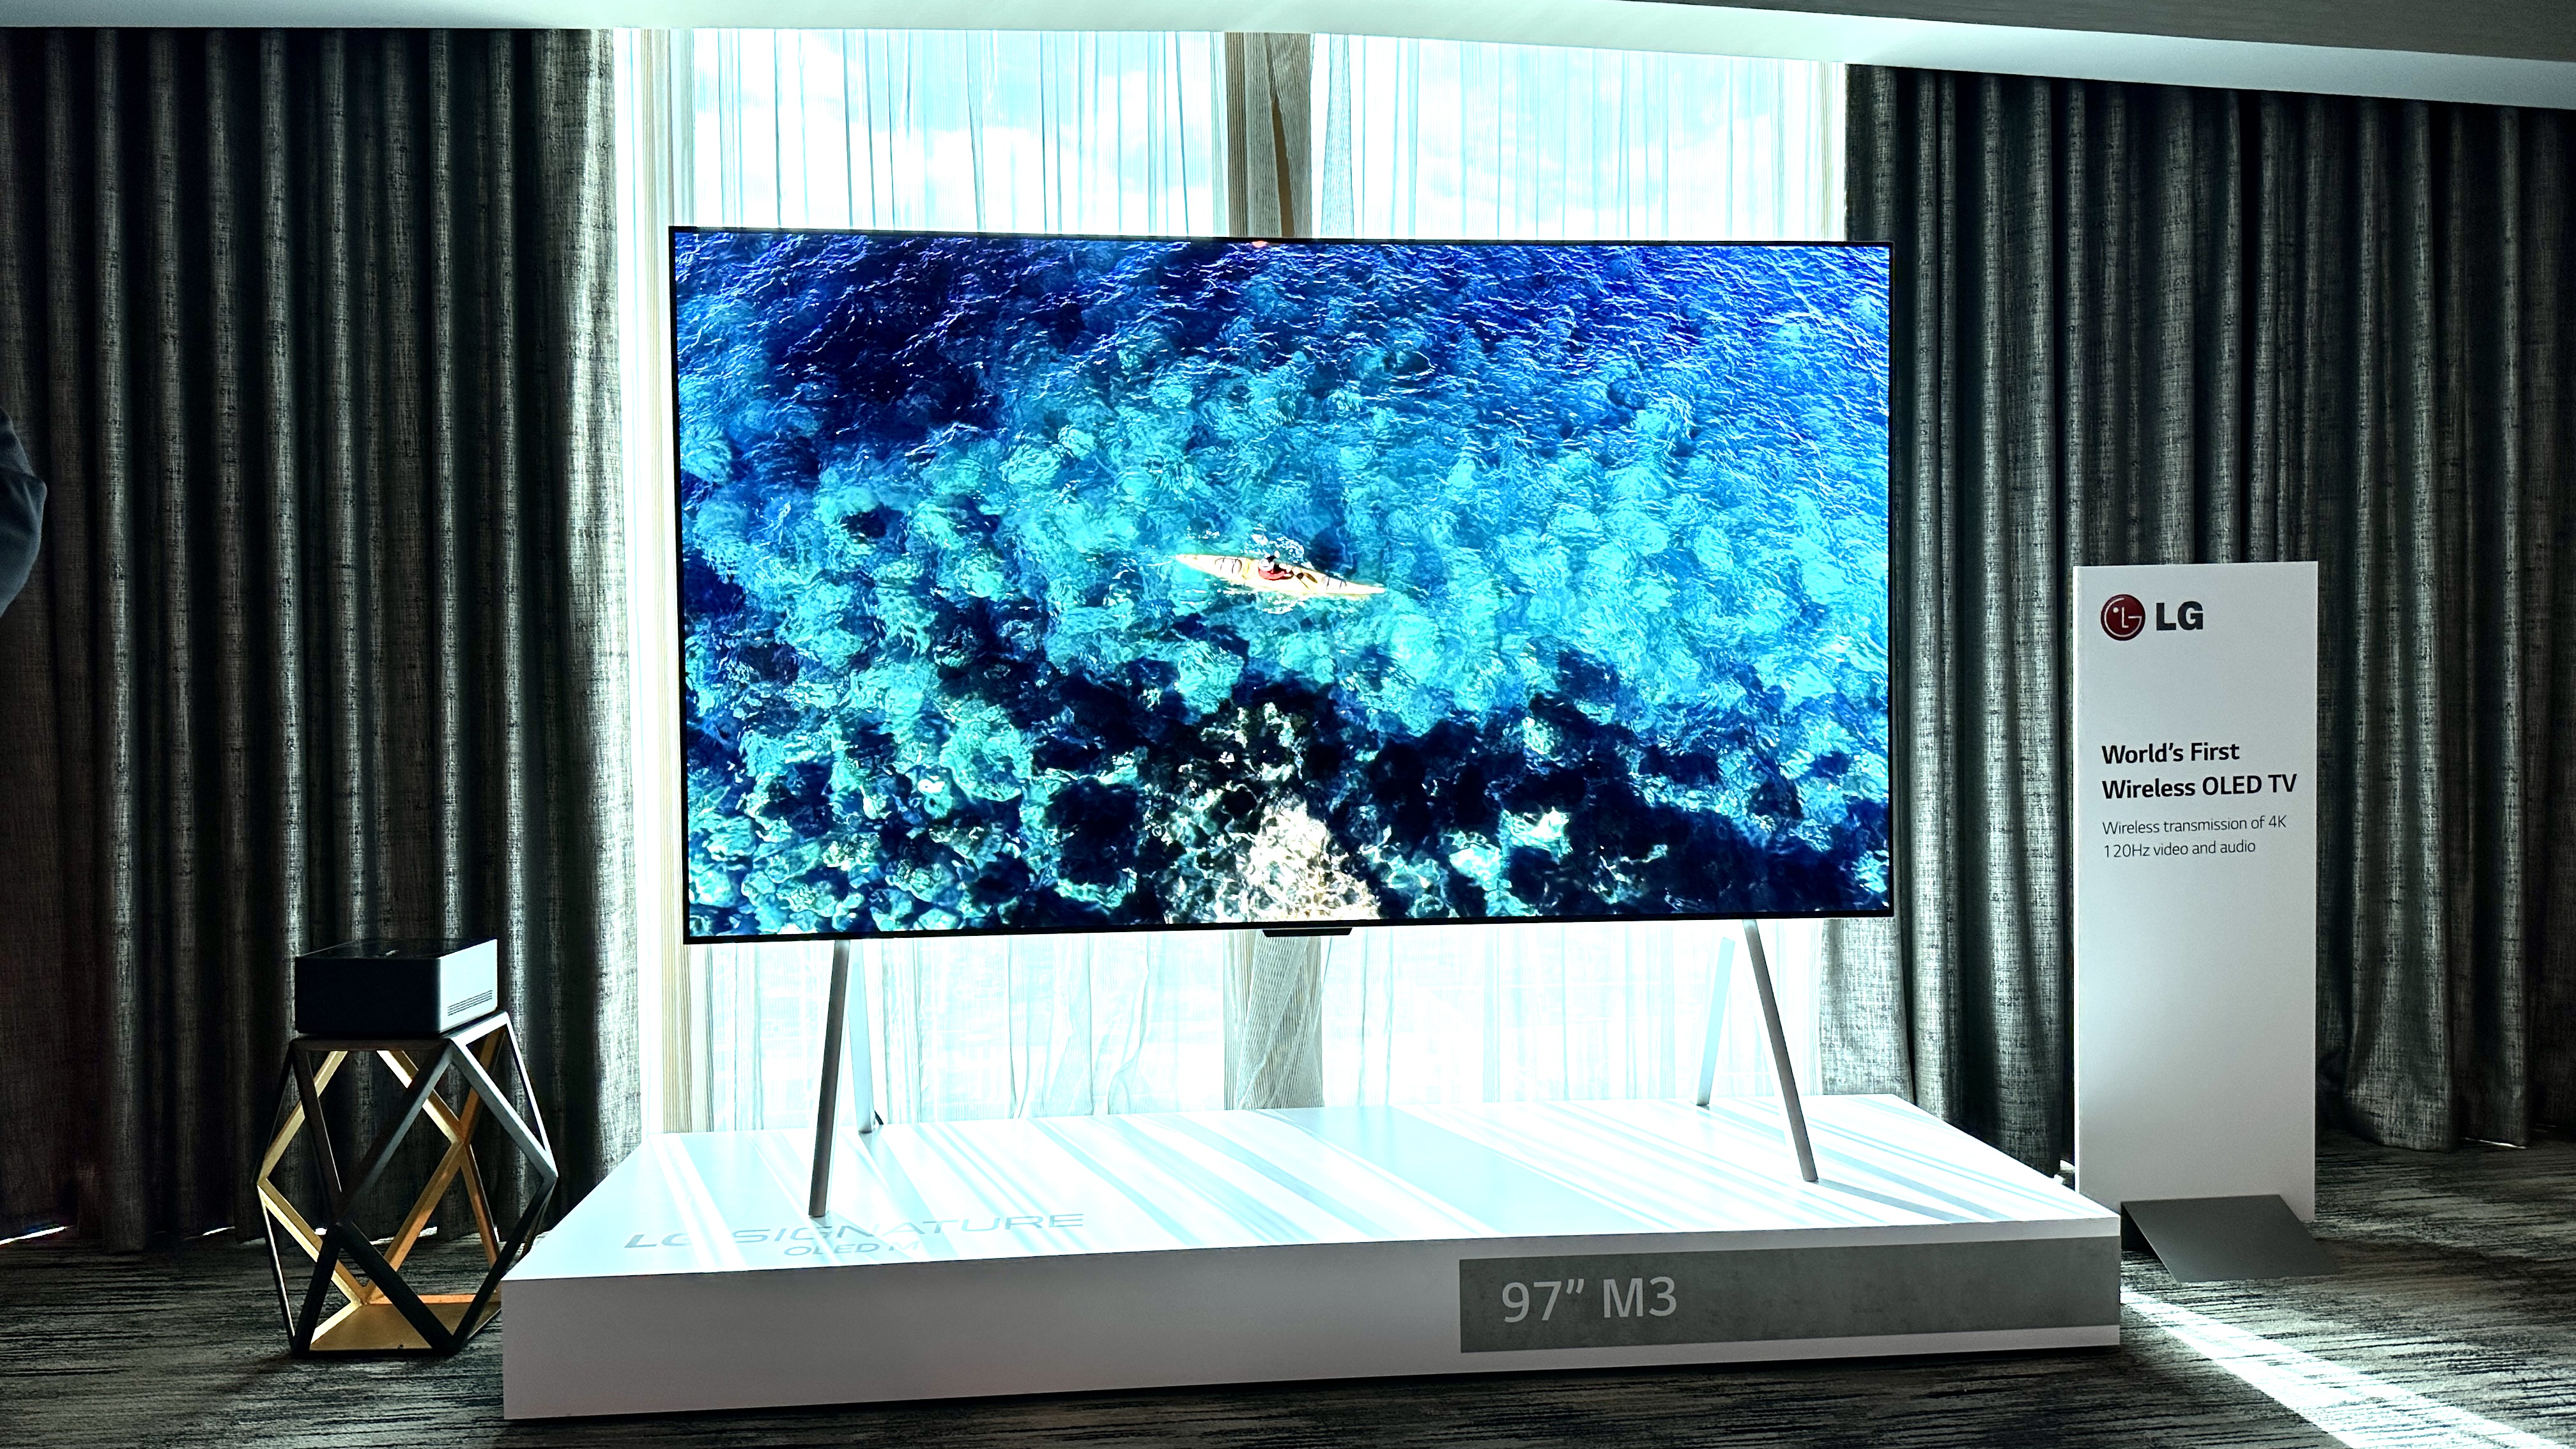 LG's wireless 4K OLED TV is officially the coolest TV at CES 2023